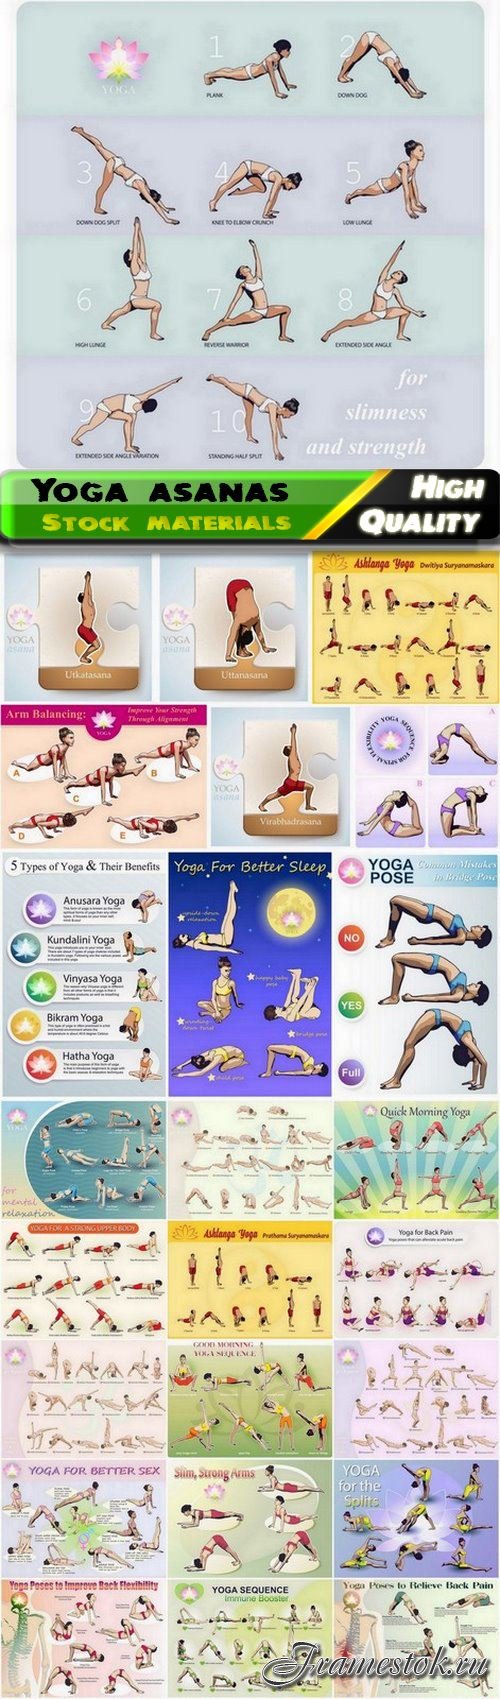 Sport woman and man in yoga asana and pose - 25 Eps